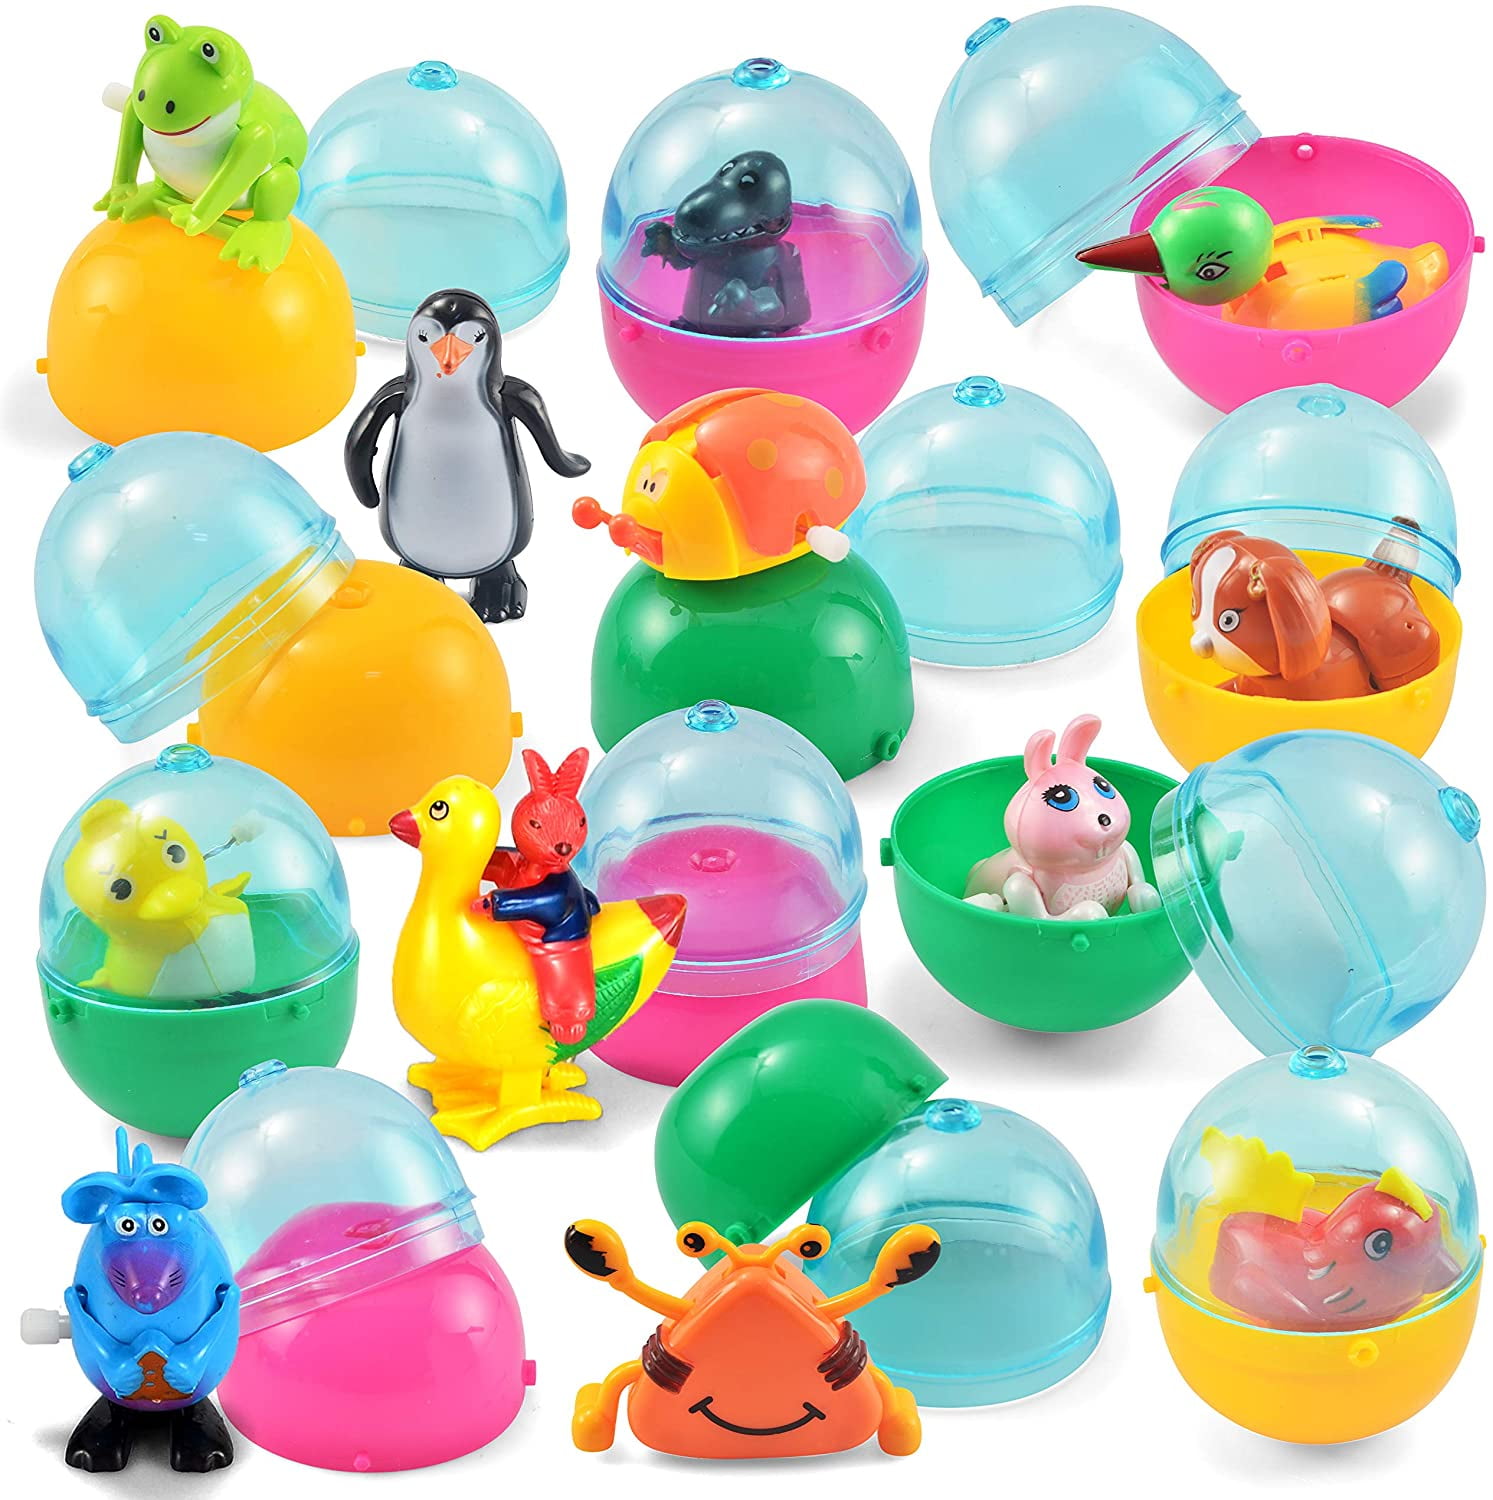 Educational Toys Learning Toys Easter Gifts for Kid and Toddlers’ Preschool Games JOYIN 12 Packs Matching Easter Eggs with Eggs Holder Dinosaur 